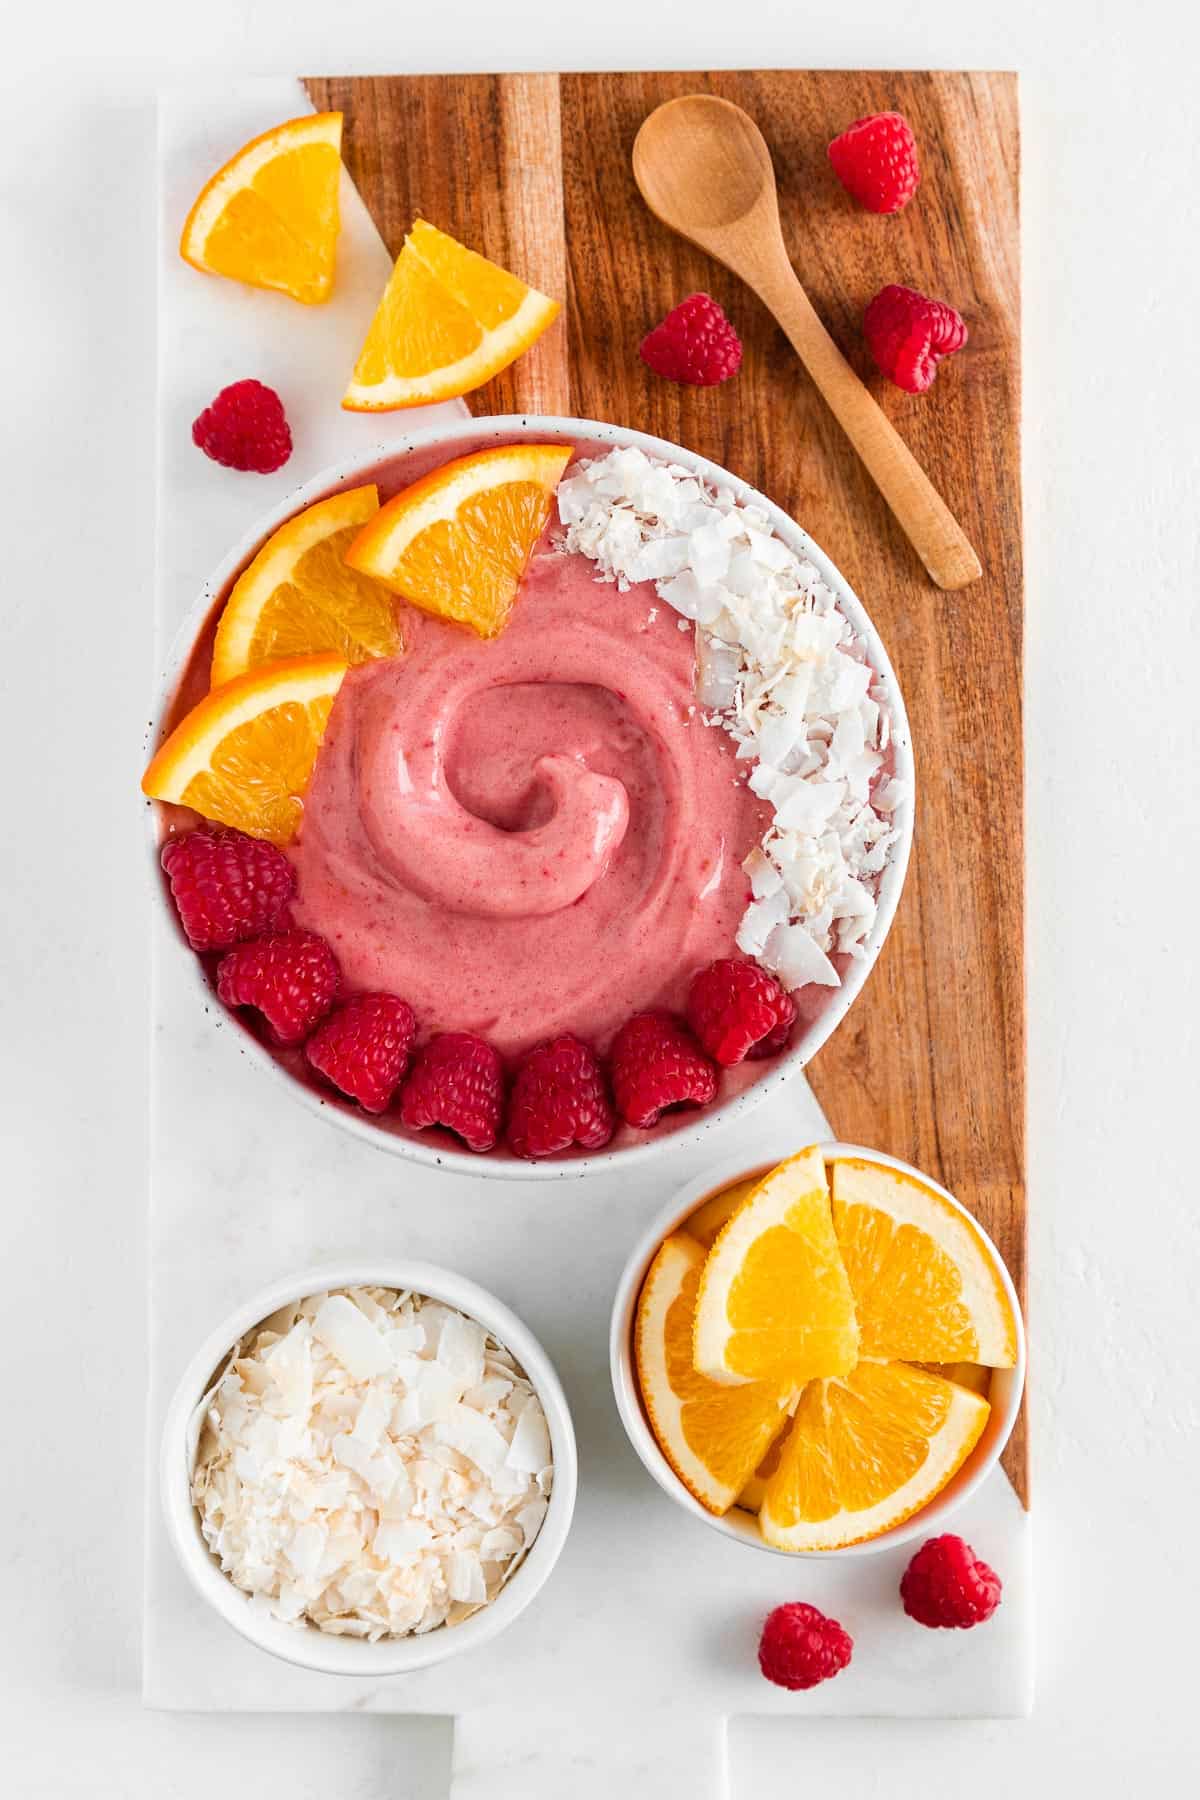 a wood and marble board topped with a raspberry orange smoothie bowl, wooden spoon, and bowls filled with fresh fruit